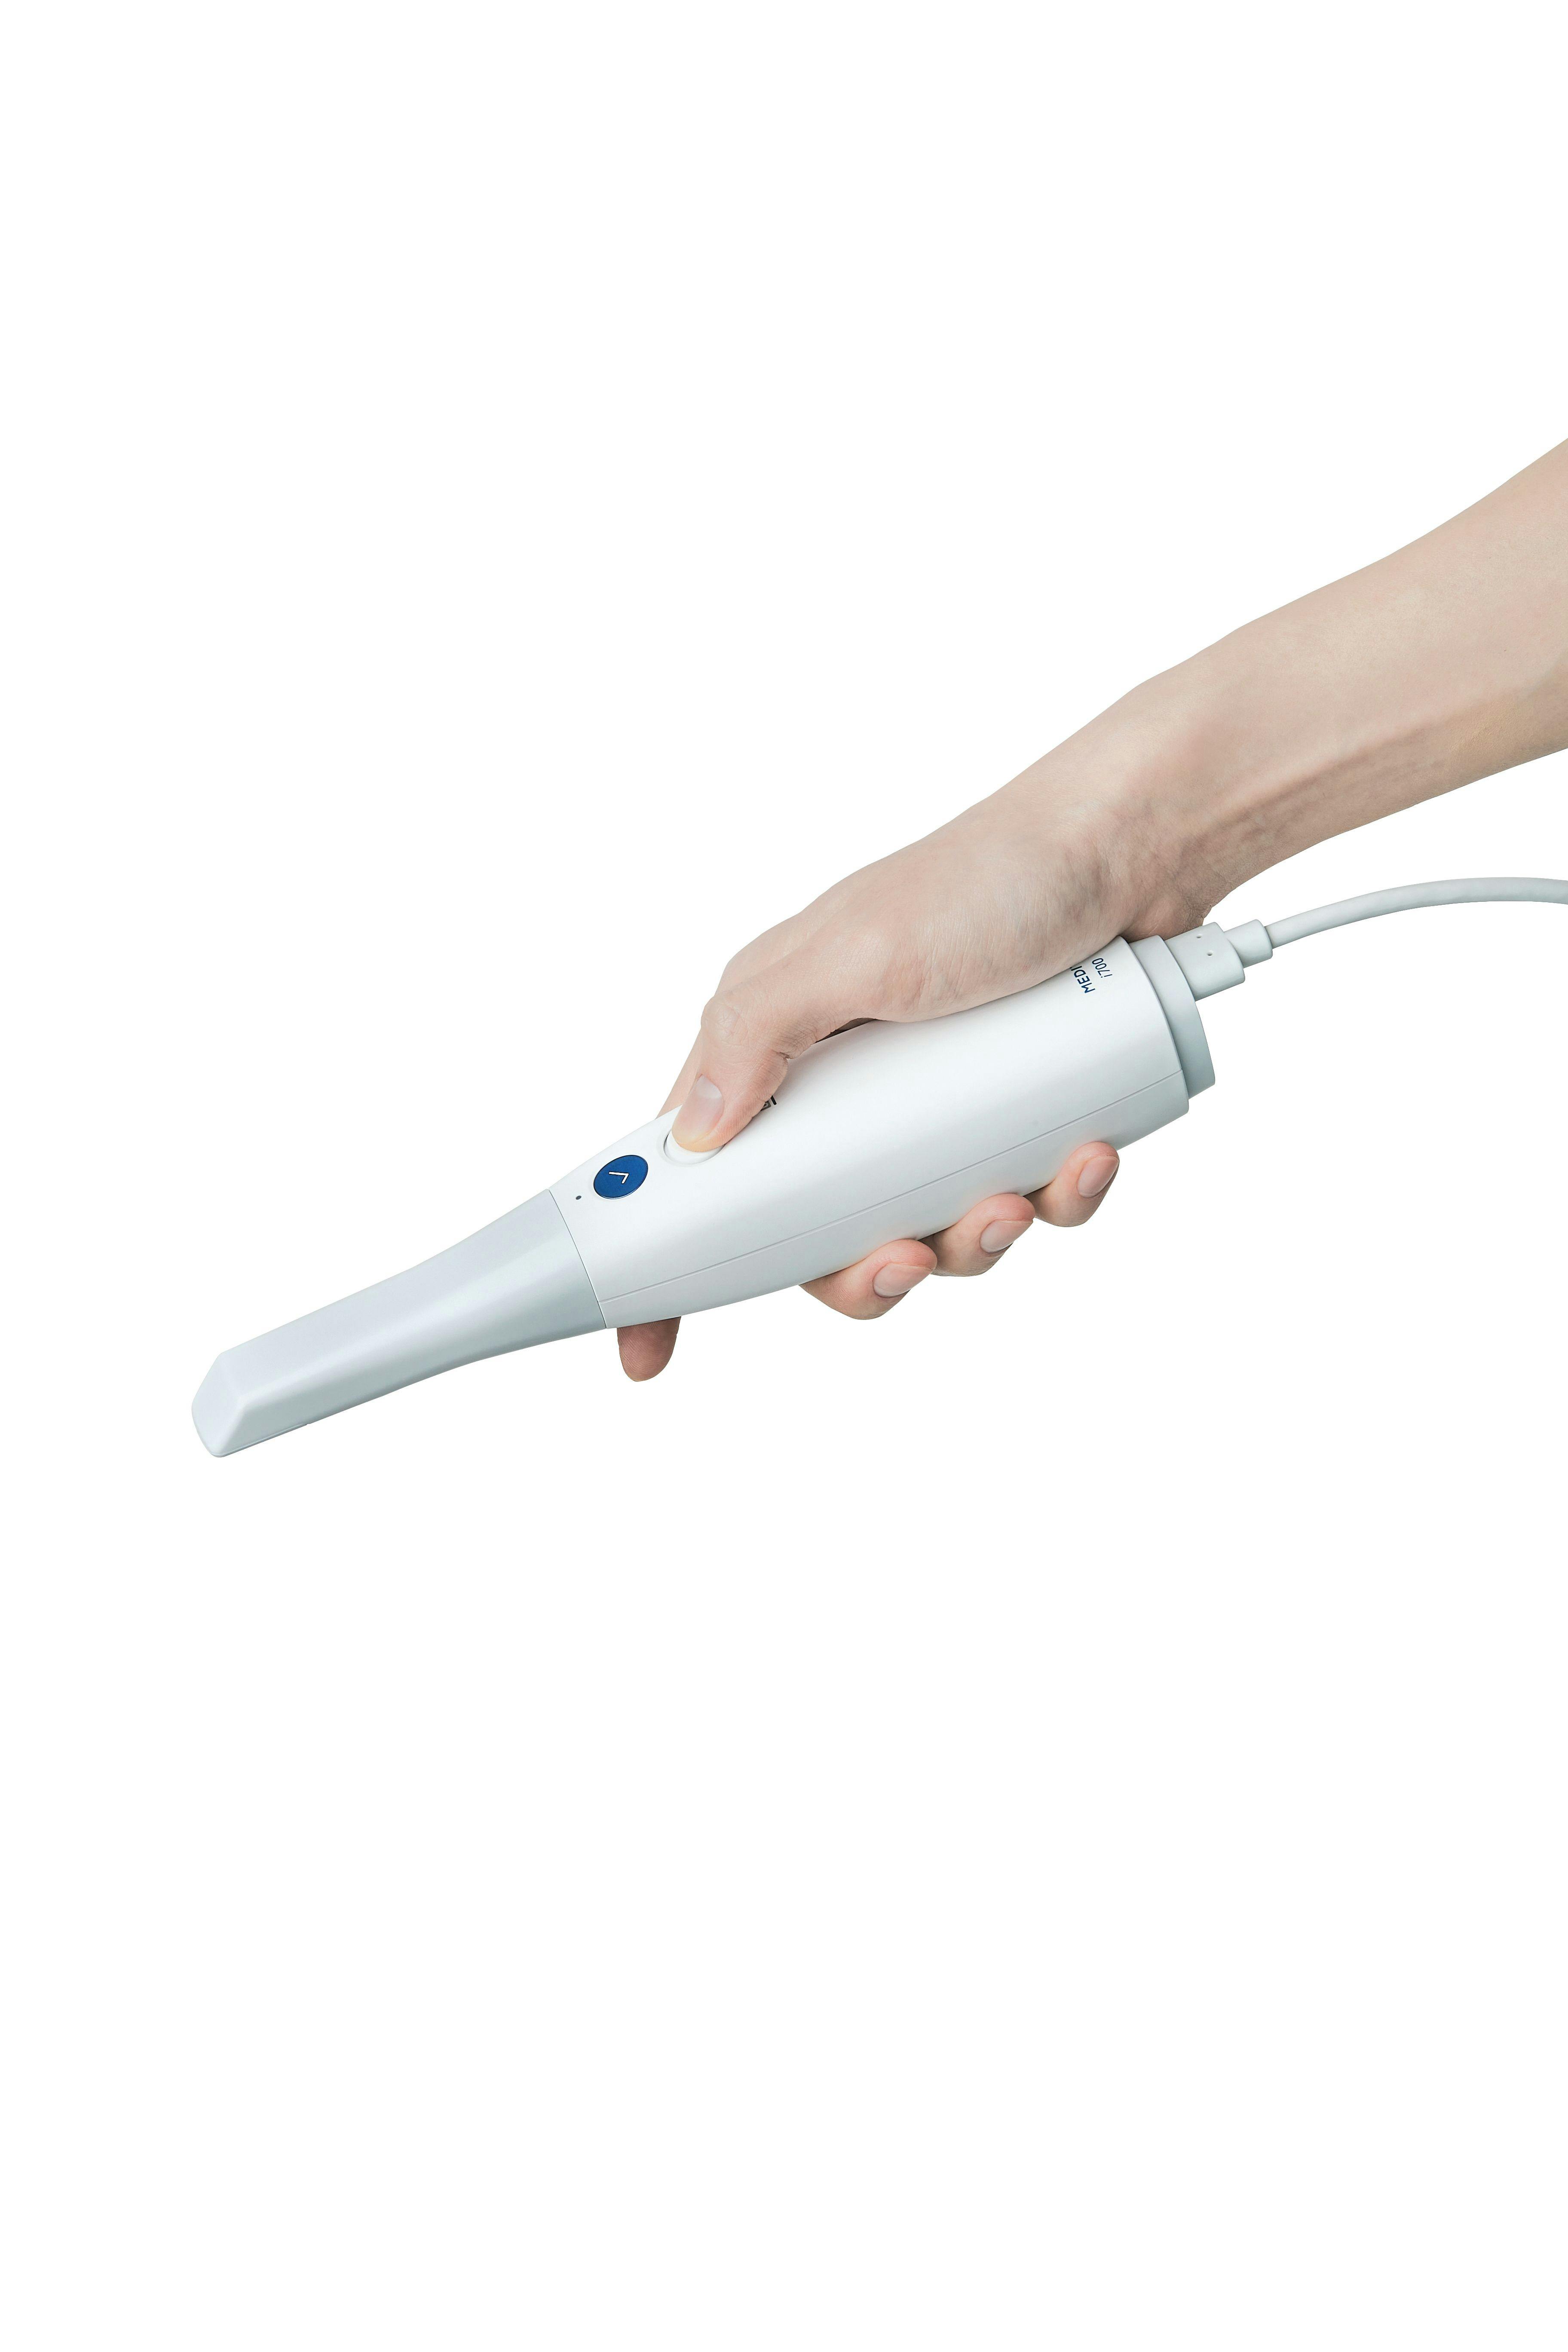 An image of someone holding the Medit i700 intraoral scanner